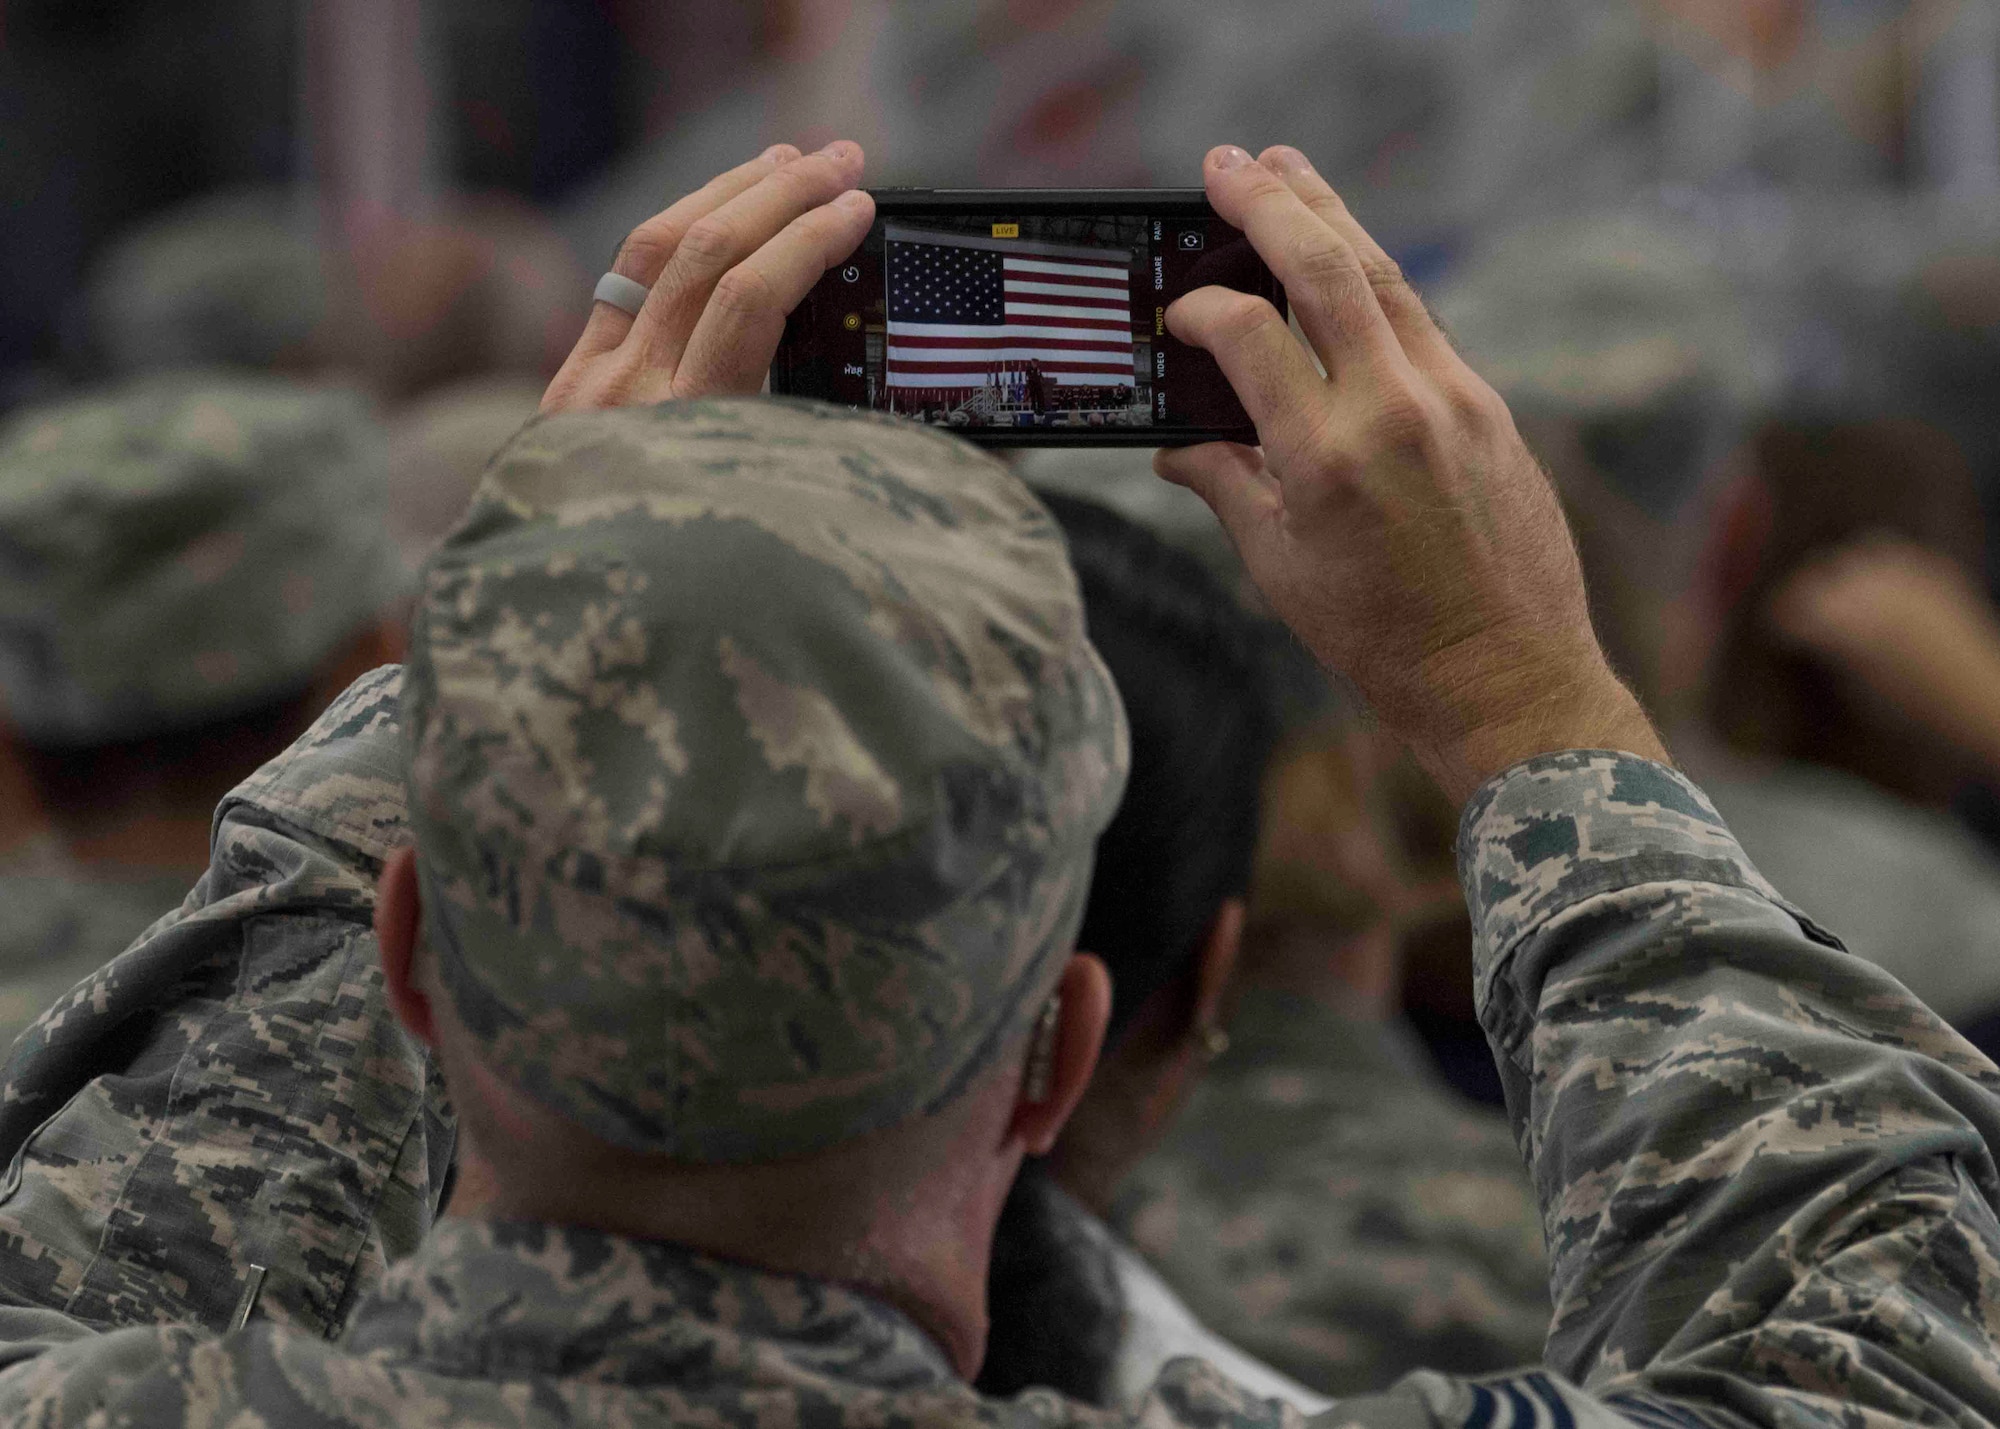 An attendee takes a photo of Gen. Carlton D. Everhart II, Air Mobility Command commander, as he gives his final speech as the AMC commander during the AMC change of command ceremony, Scott Air Force Base, Illinois, Sept. 7, 2018. Gen. Maryanne Miller assumed command from Gen. Carlton D. Everhart II, who retires after 35 years of service to the Air Force. AMC provides rapid global air mobility and sustainment for America's armed forces through airlift, aerial refueling, aeromedical evacuation and mobility support. (U.S. Air Force photo by Tech. Sgt. Jodi Martinez)